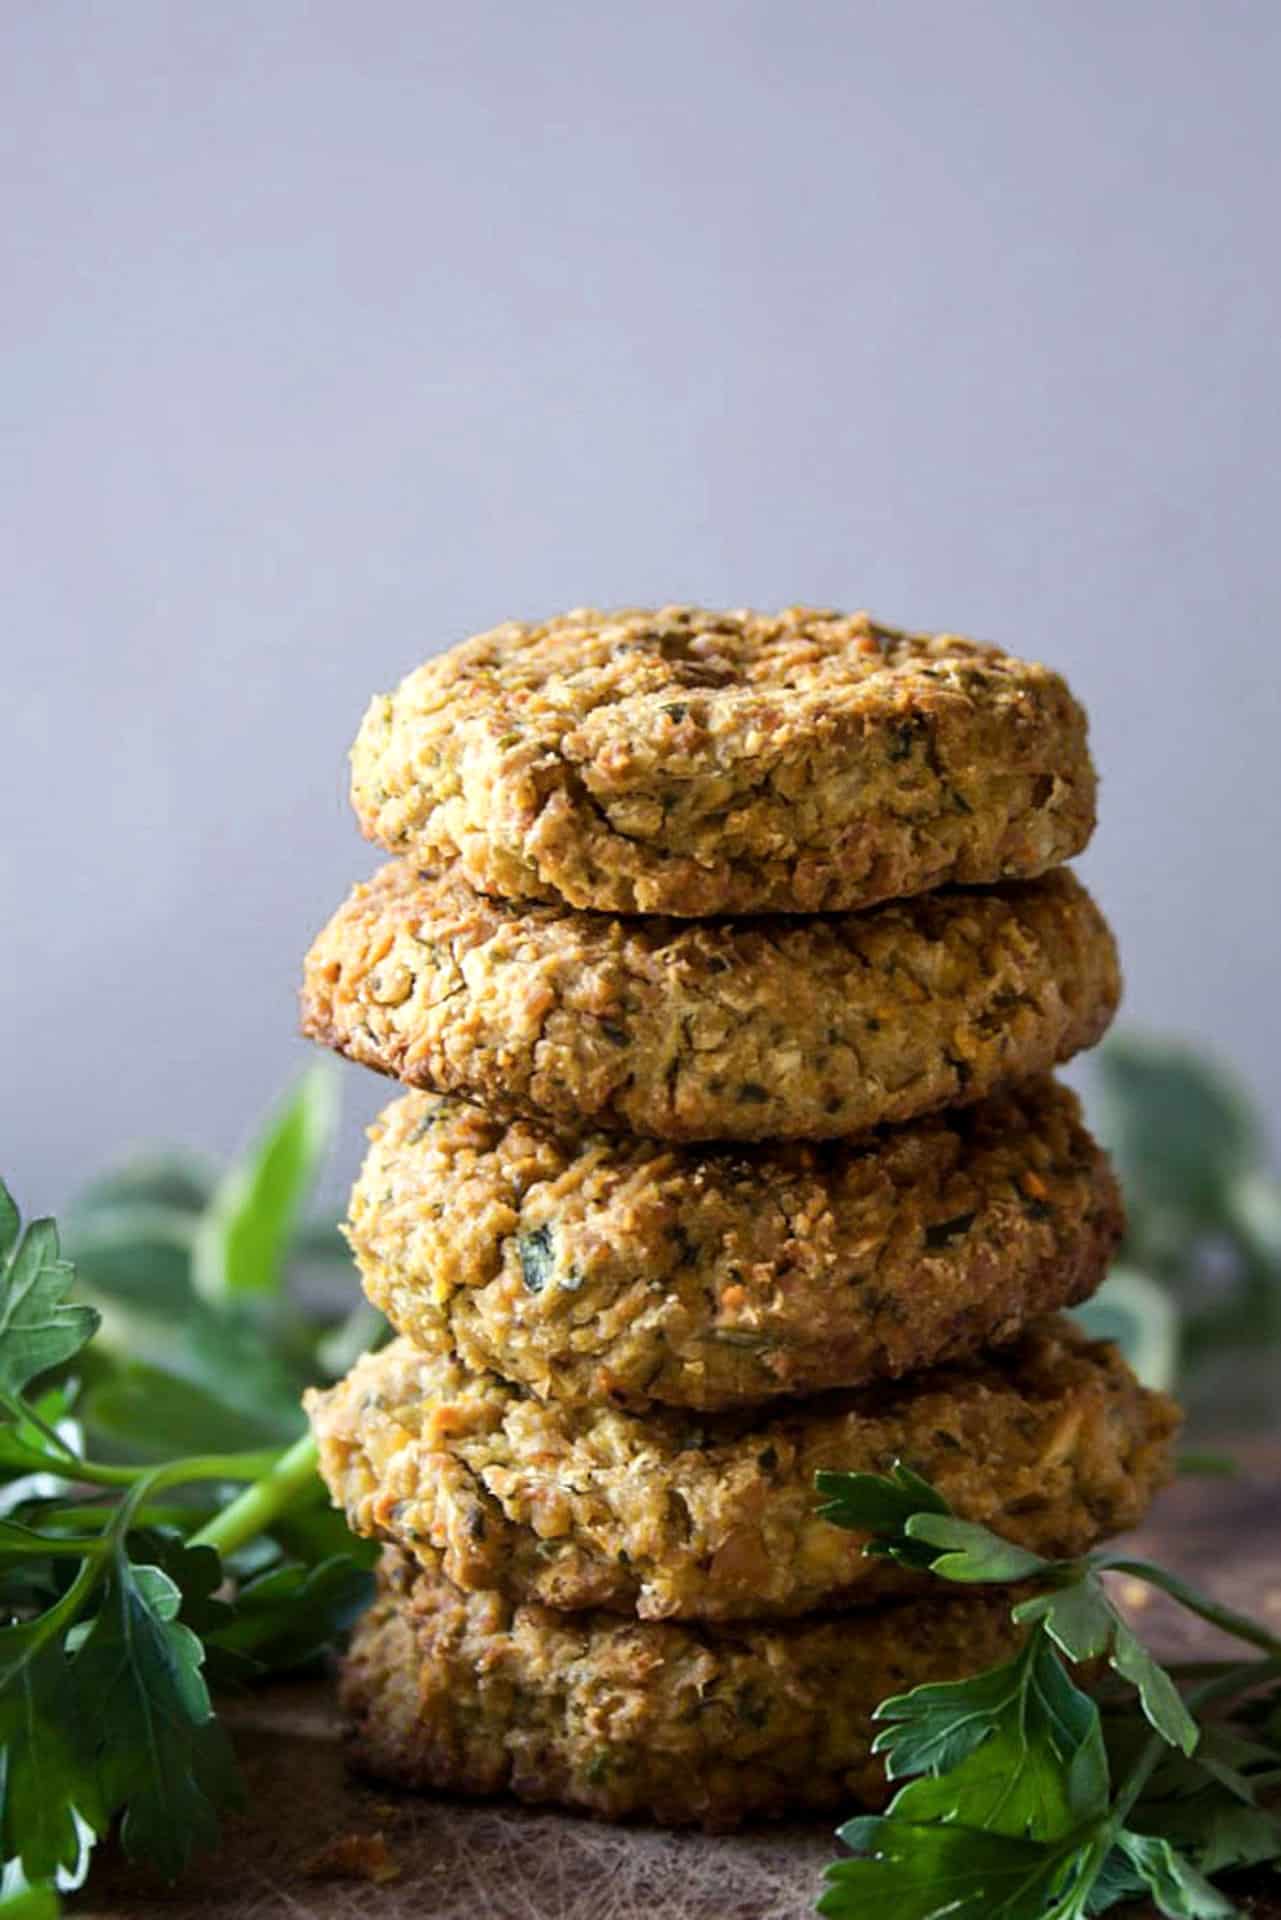 This Low FODMAP Falafel is crispy on the outside and soft on the inside, flavorful, satisfying and easy to digest! Plus completely vegan and gluten-free.